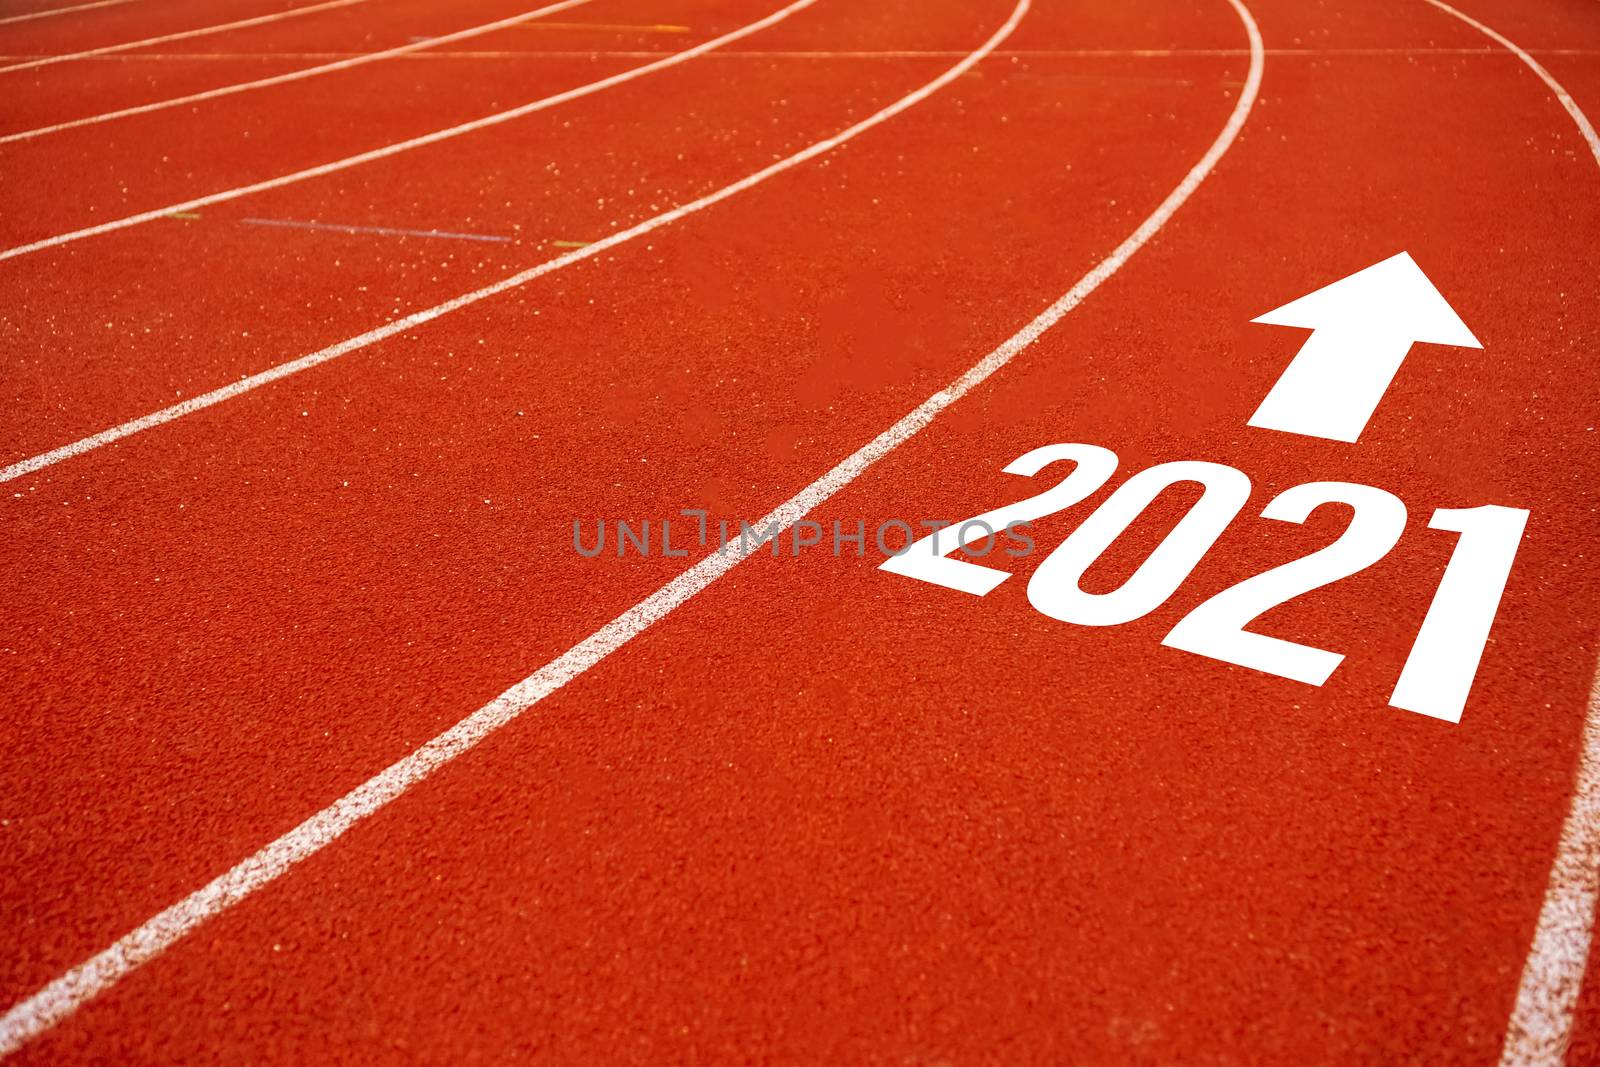 Start line to 2021 on running court represents the beginning of a journey to the destination in business planning, strategy and challenge or career path, opportunity. by Suwant